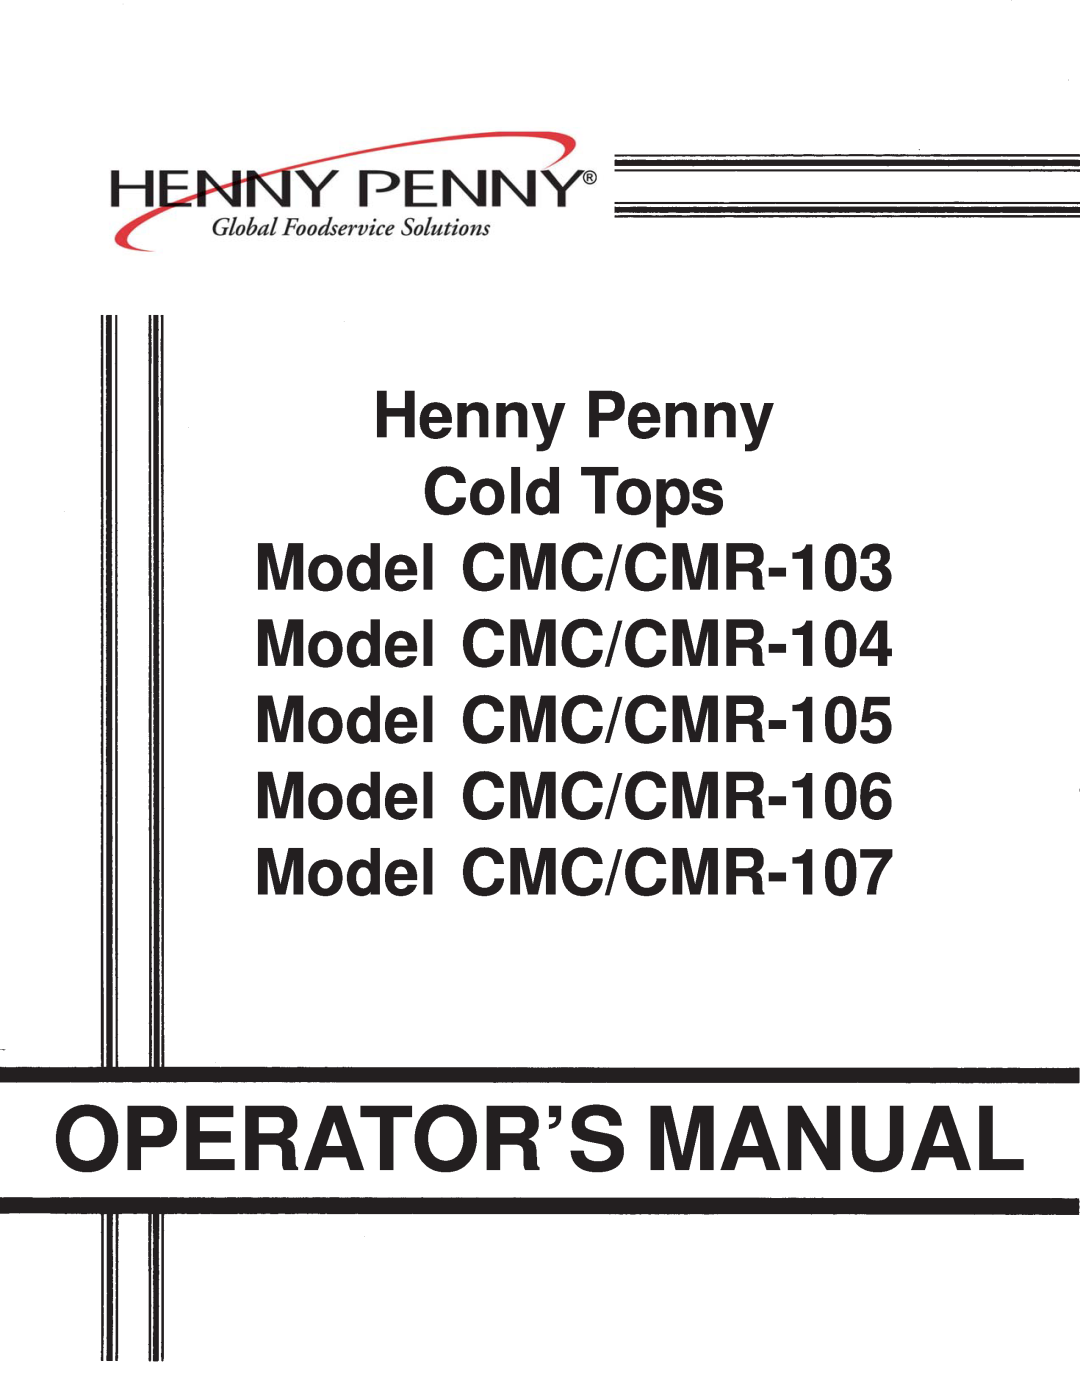 Henny Penny CMC/CMR-105, CMC/CMR-106 manual OPERATING CONTROLSRefer to figure, Description, Function, Operation 